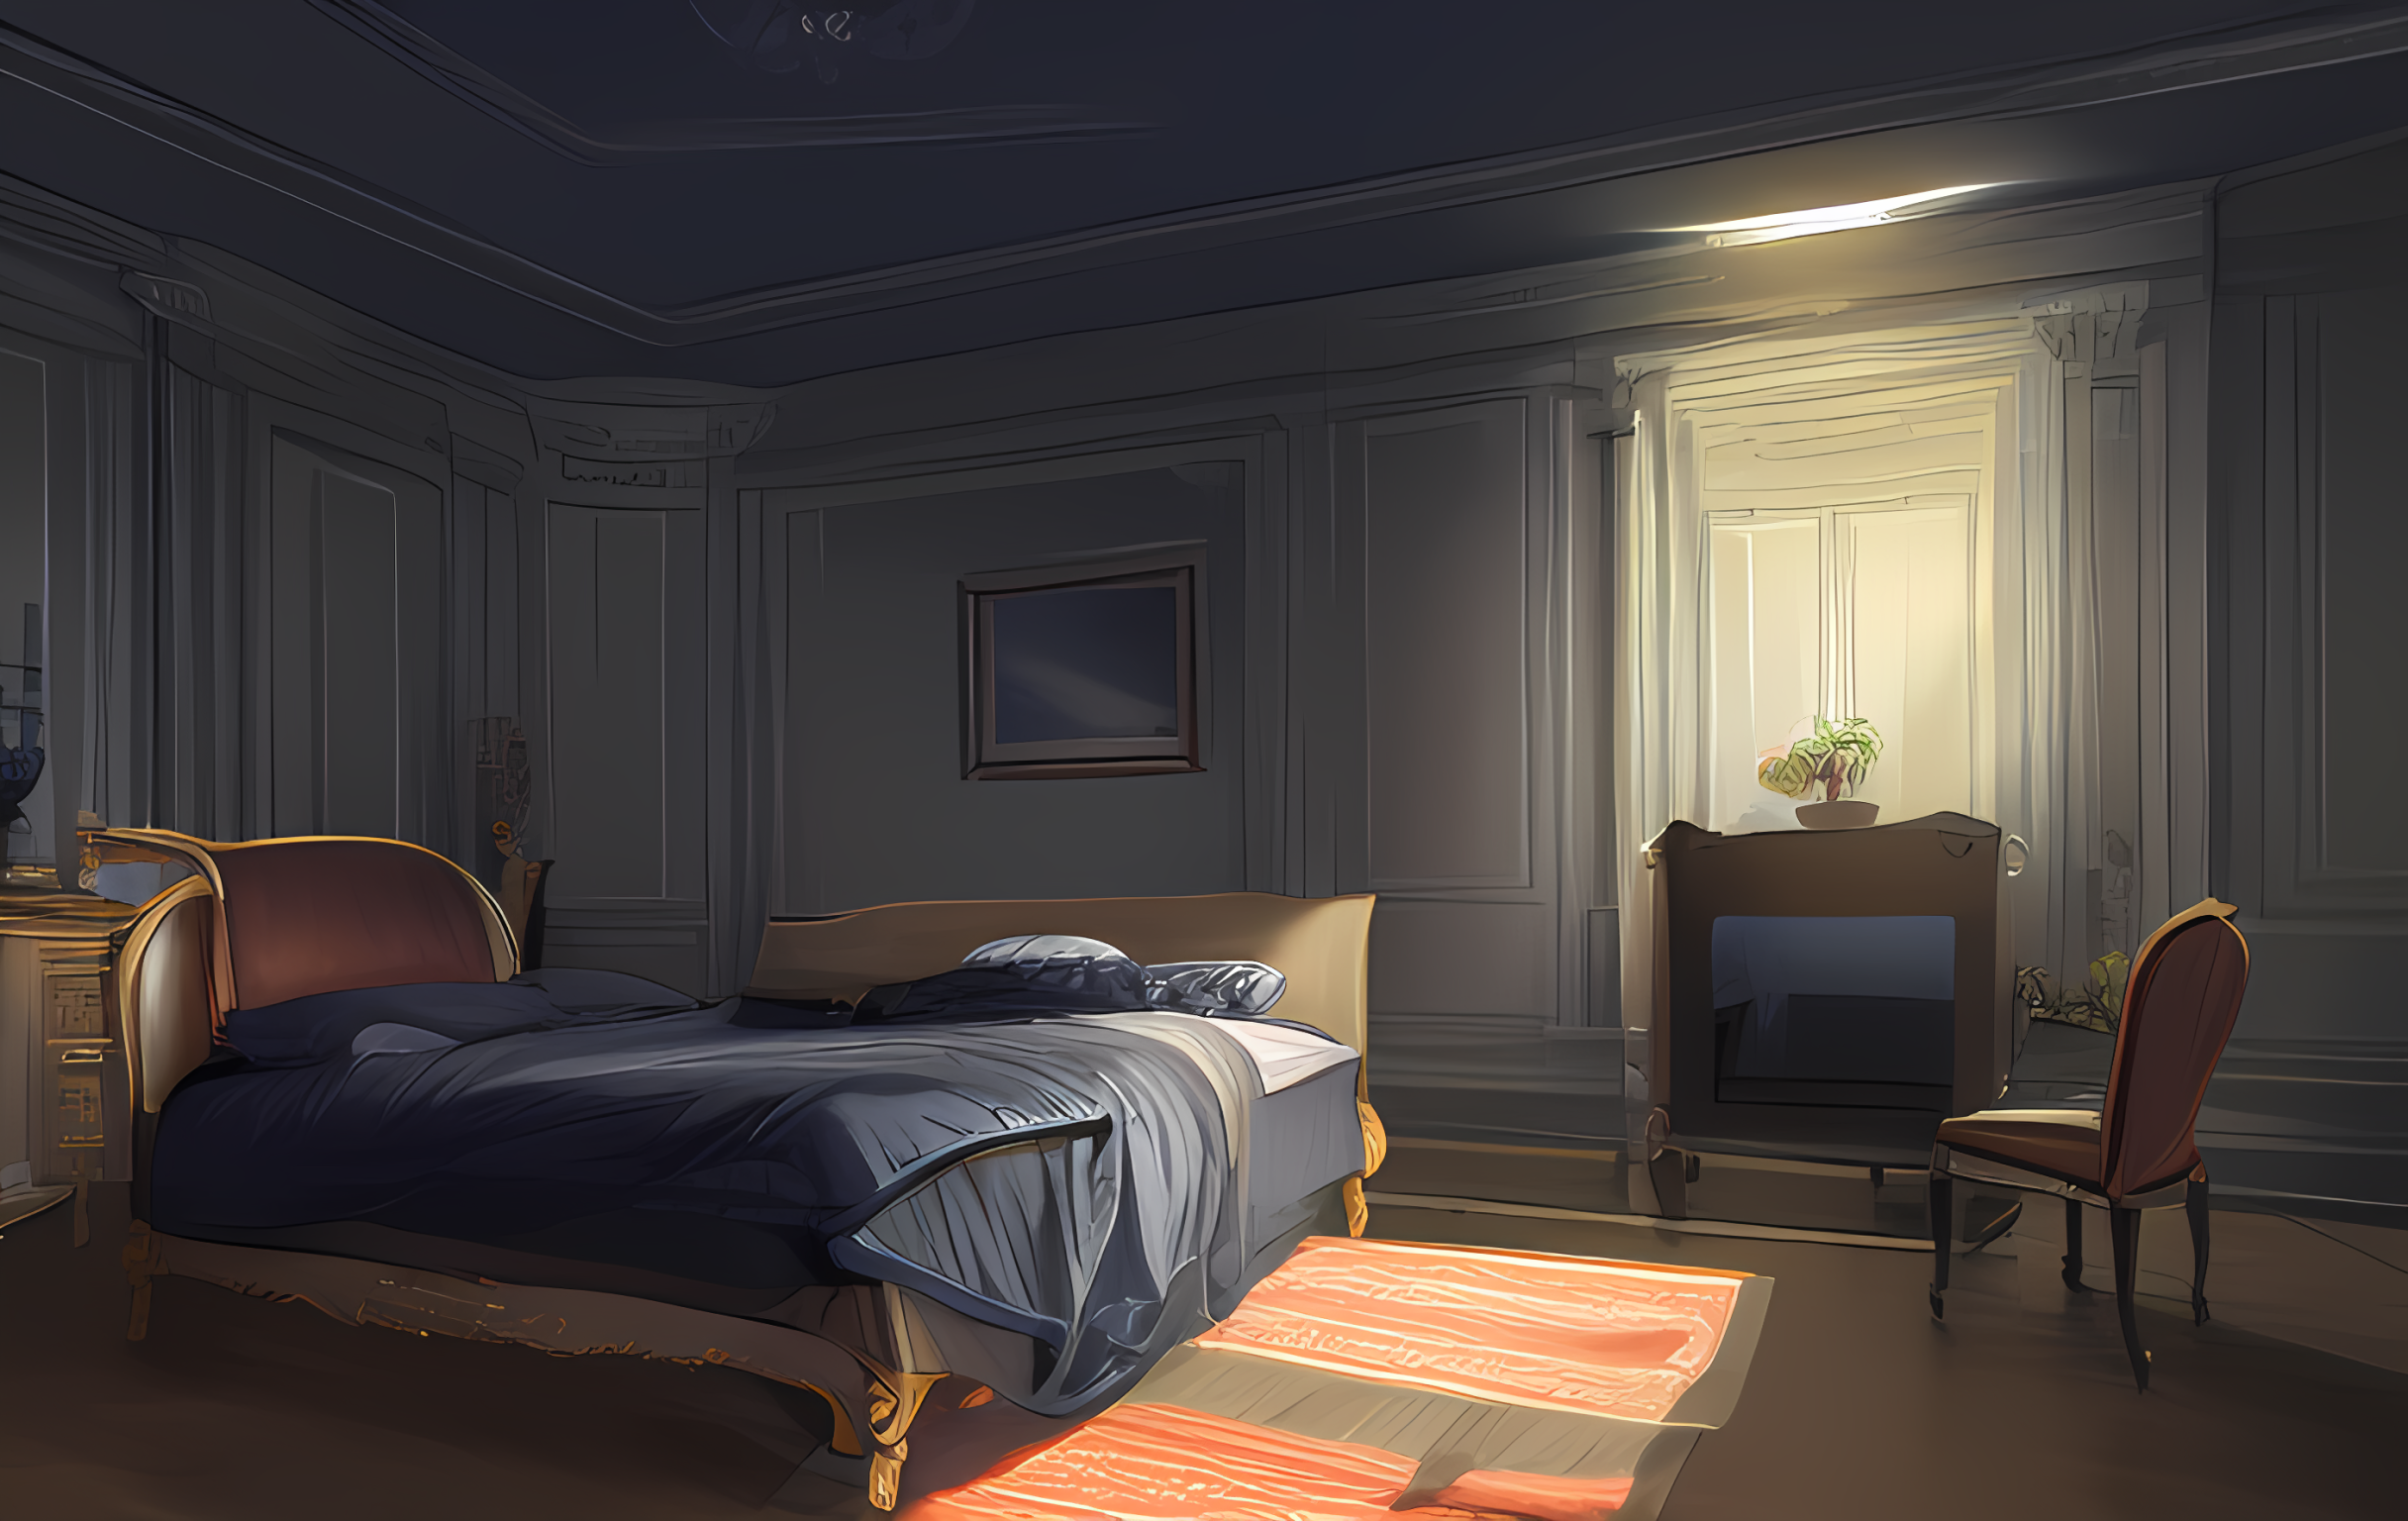 Anime 2432x1536 room afternoon relaxation warm light bed interior furnished chair